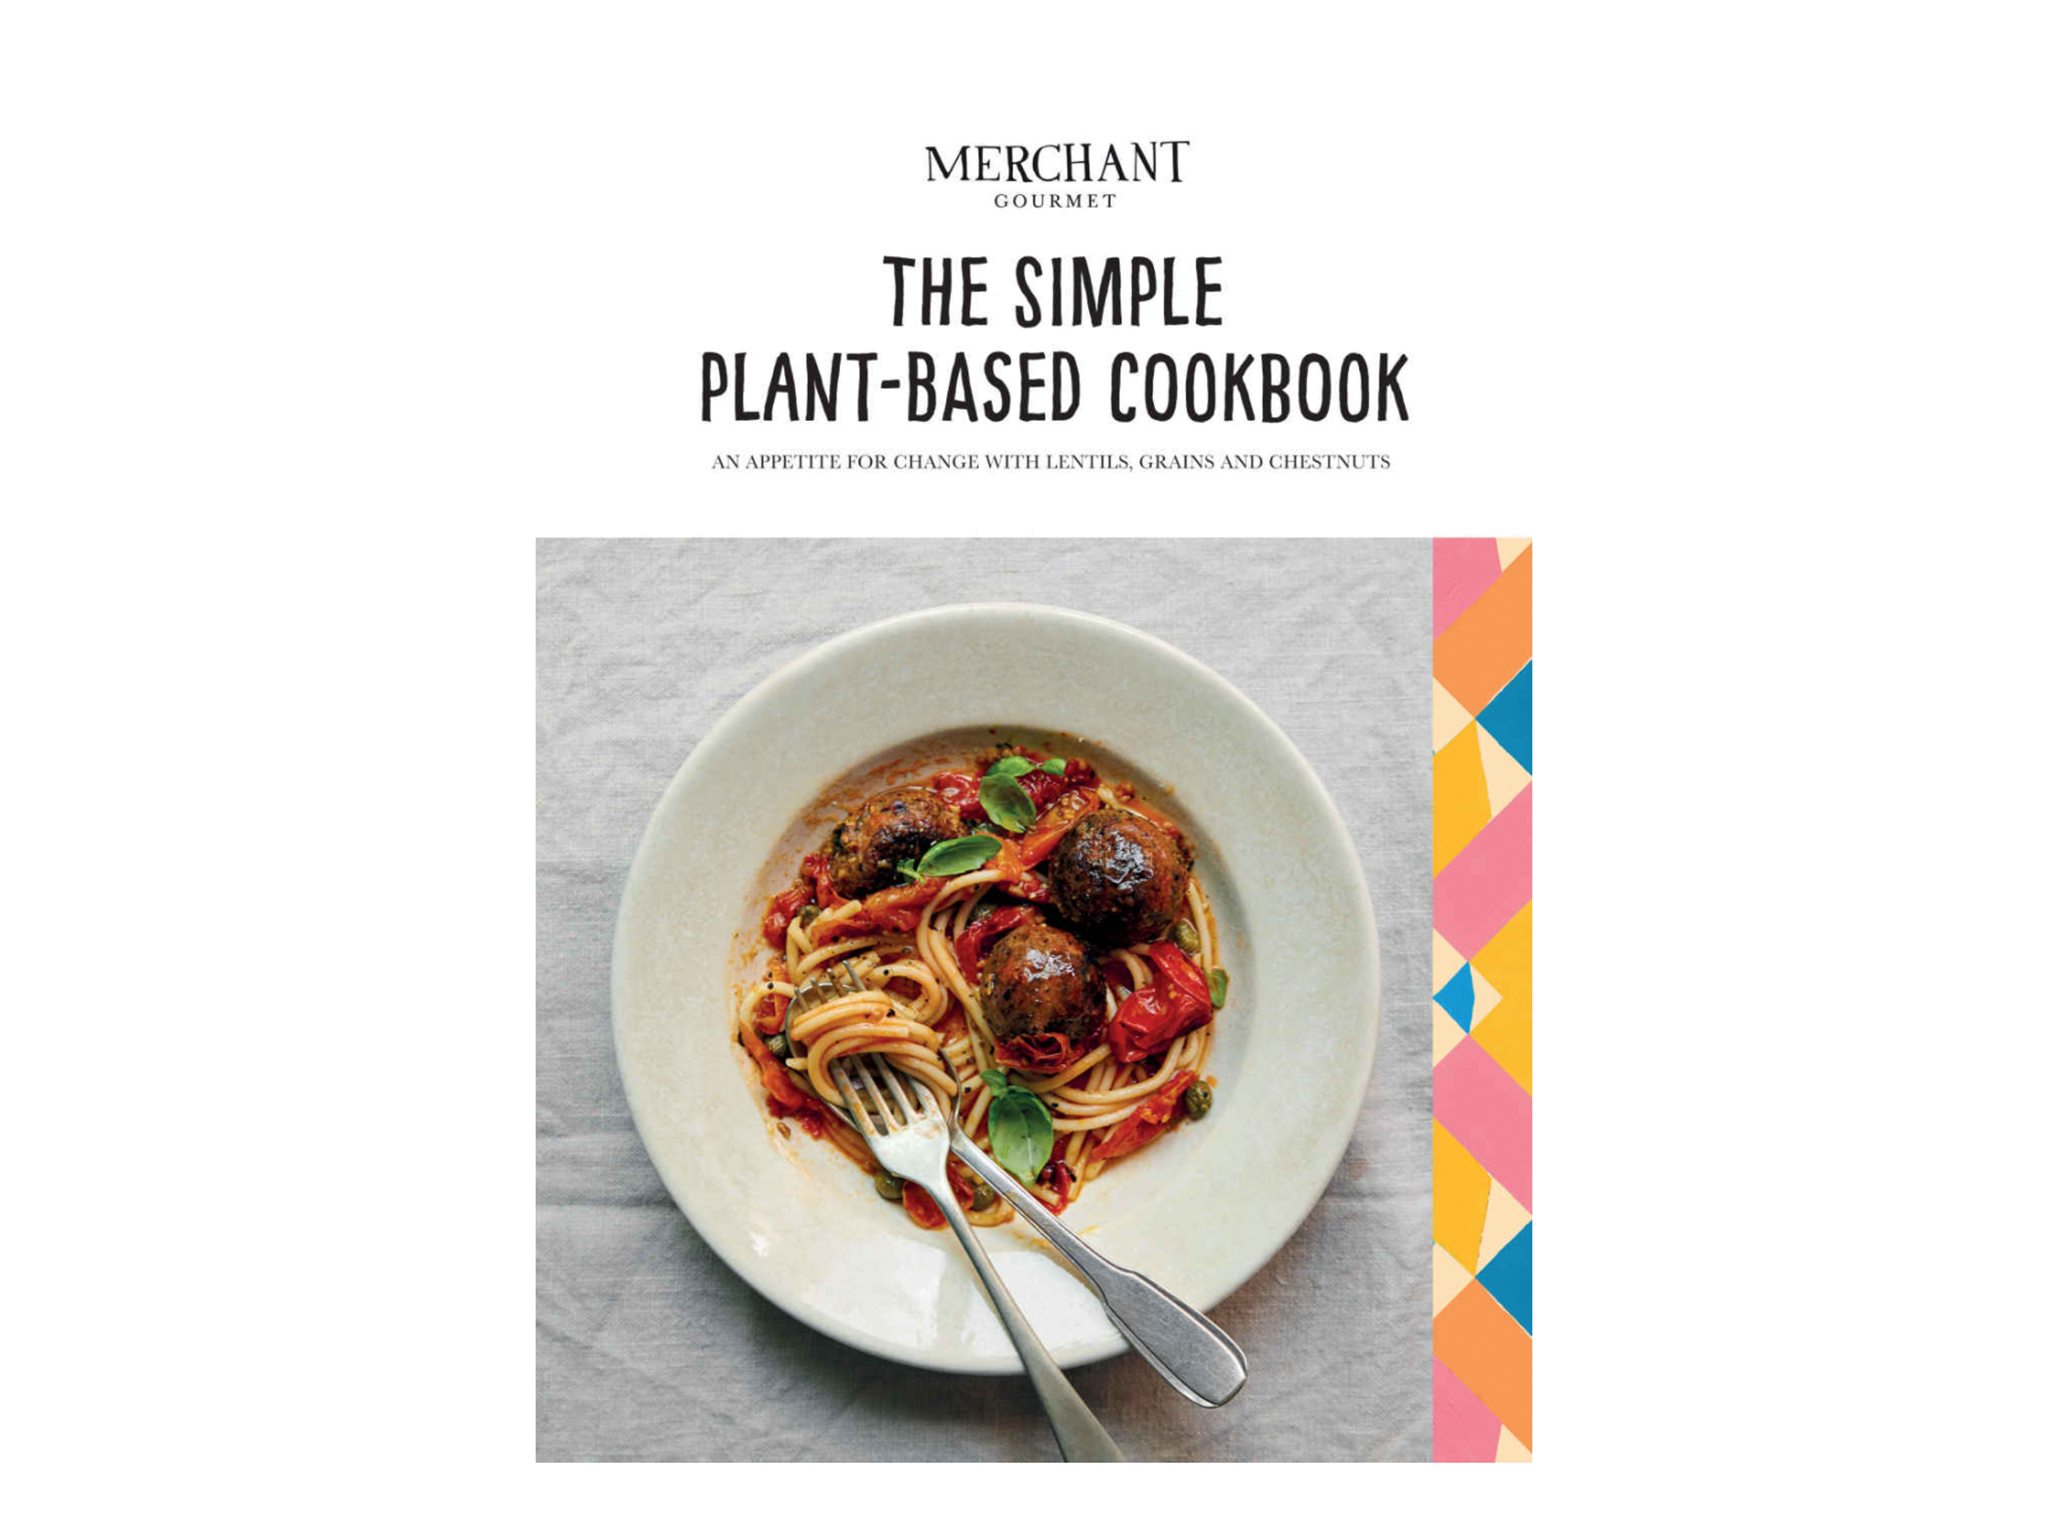 ‘The Simple Plant-Based Cookbook’ by Merchant Gourmet, published by Quadrille